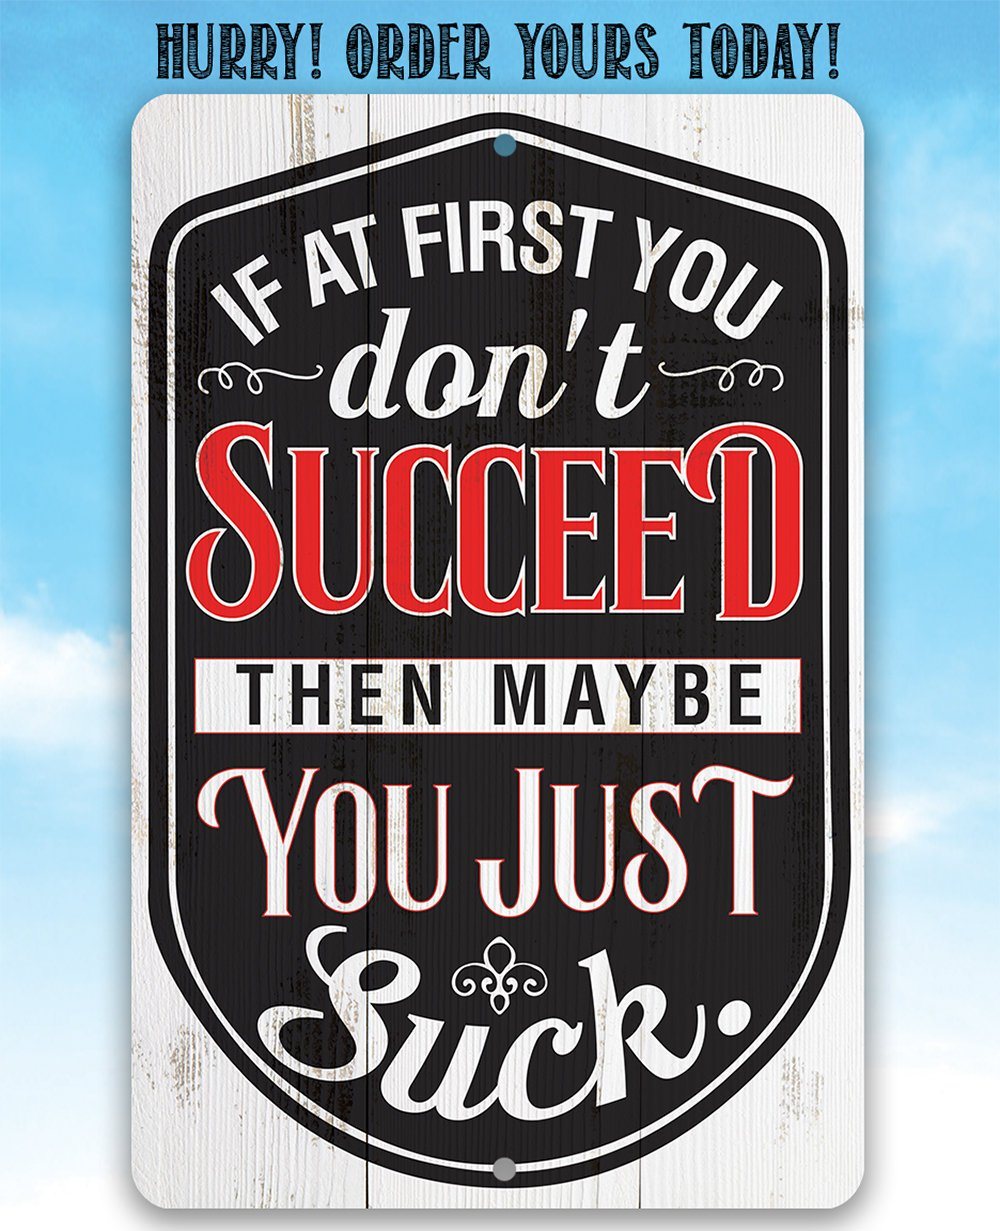 If At First You Don't Succeed - Metal Sign | Lone Star Art.